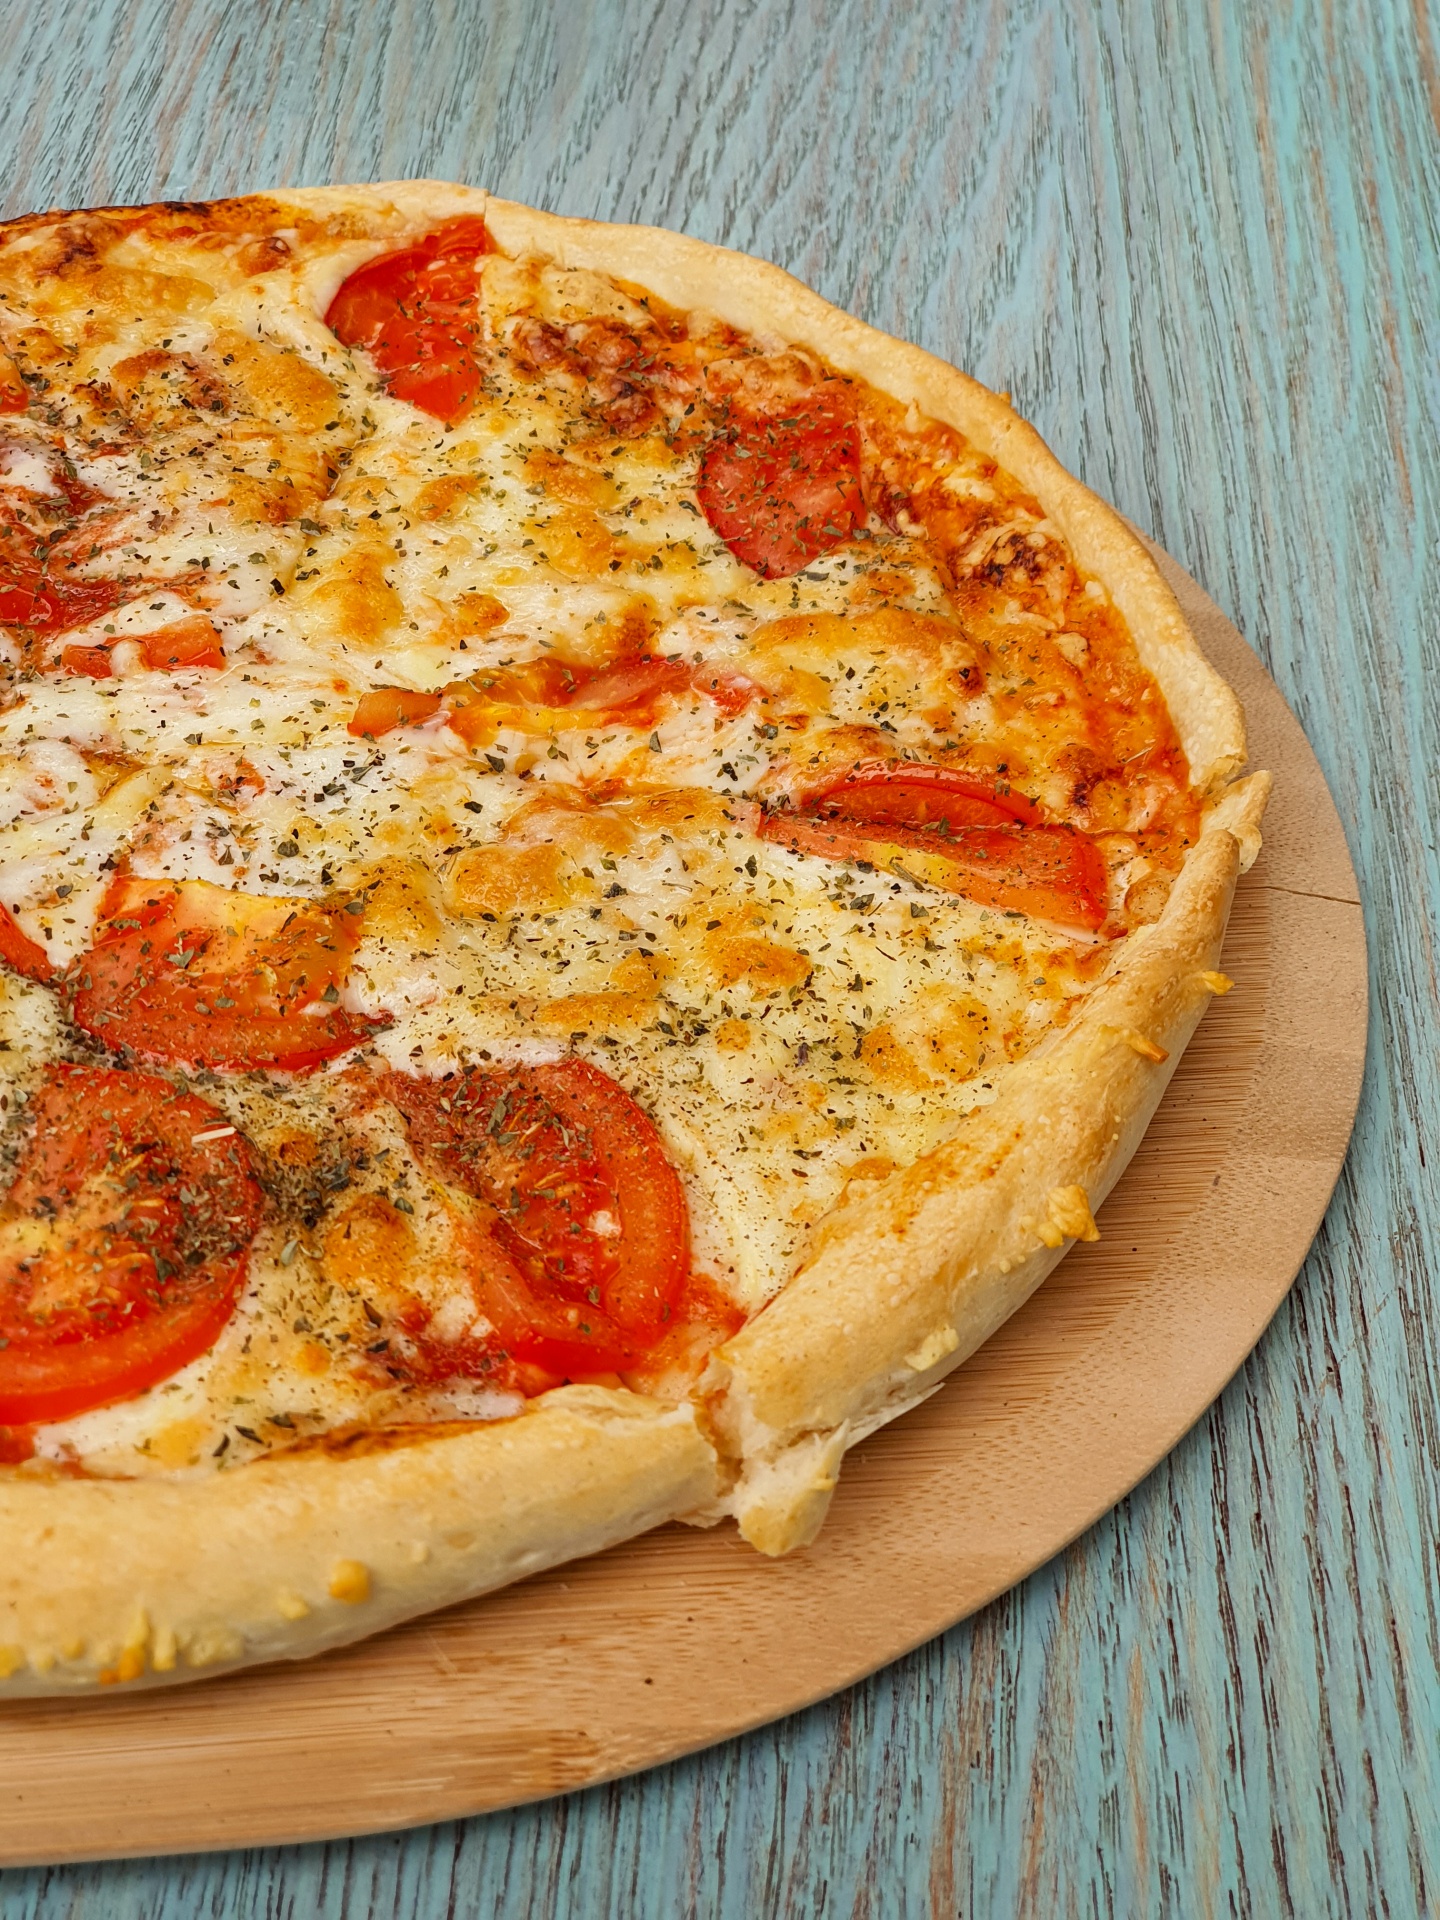 cheese-pizza-free-stock-photo-public-domain-pictures